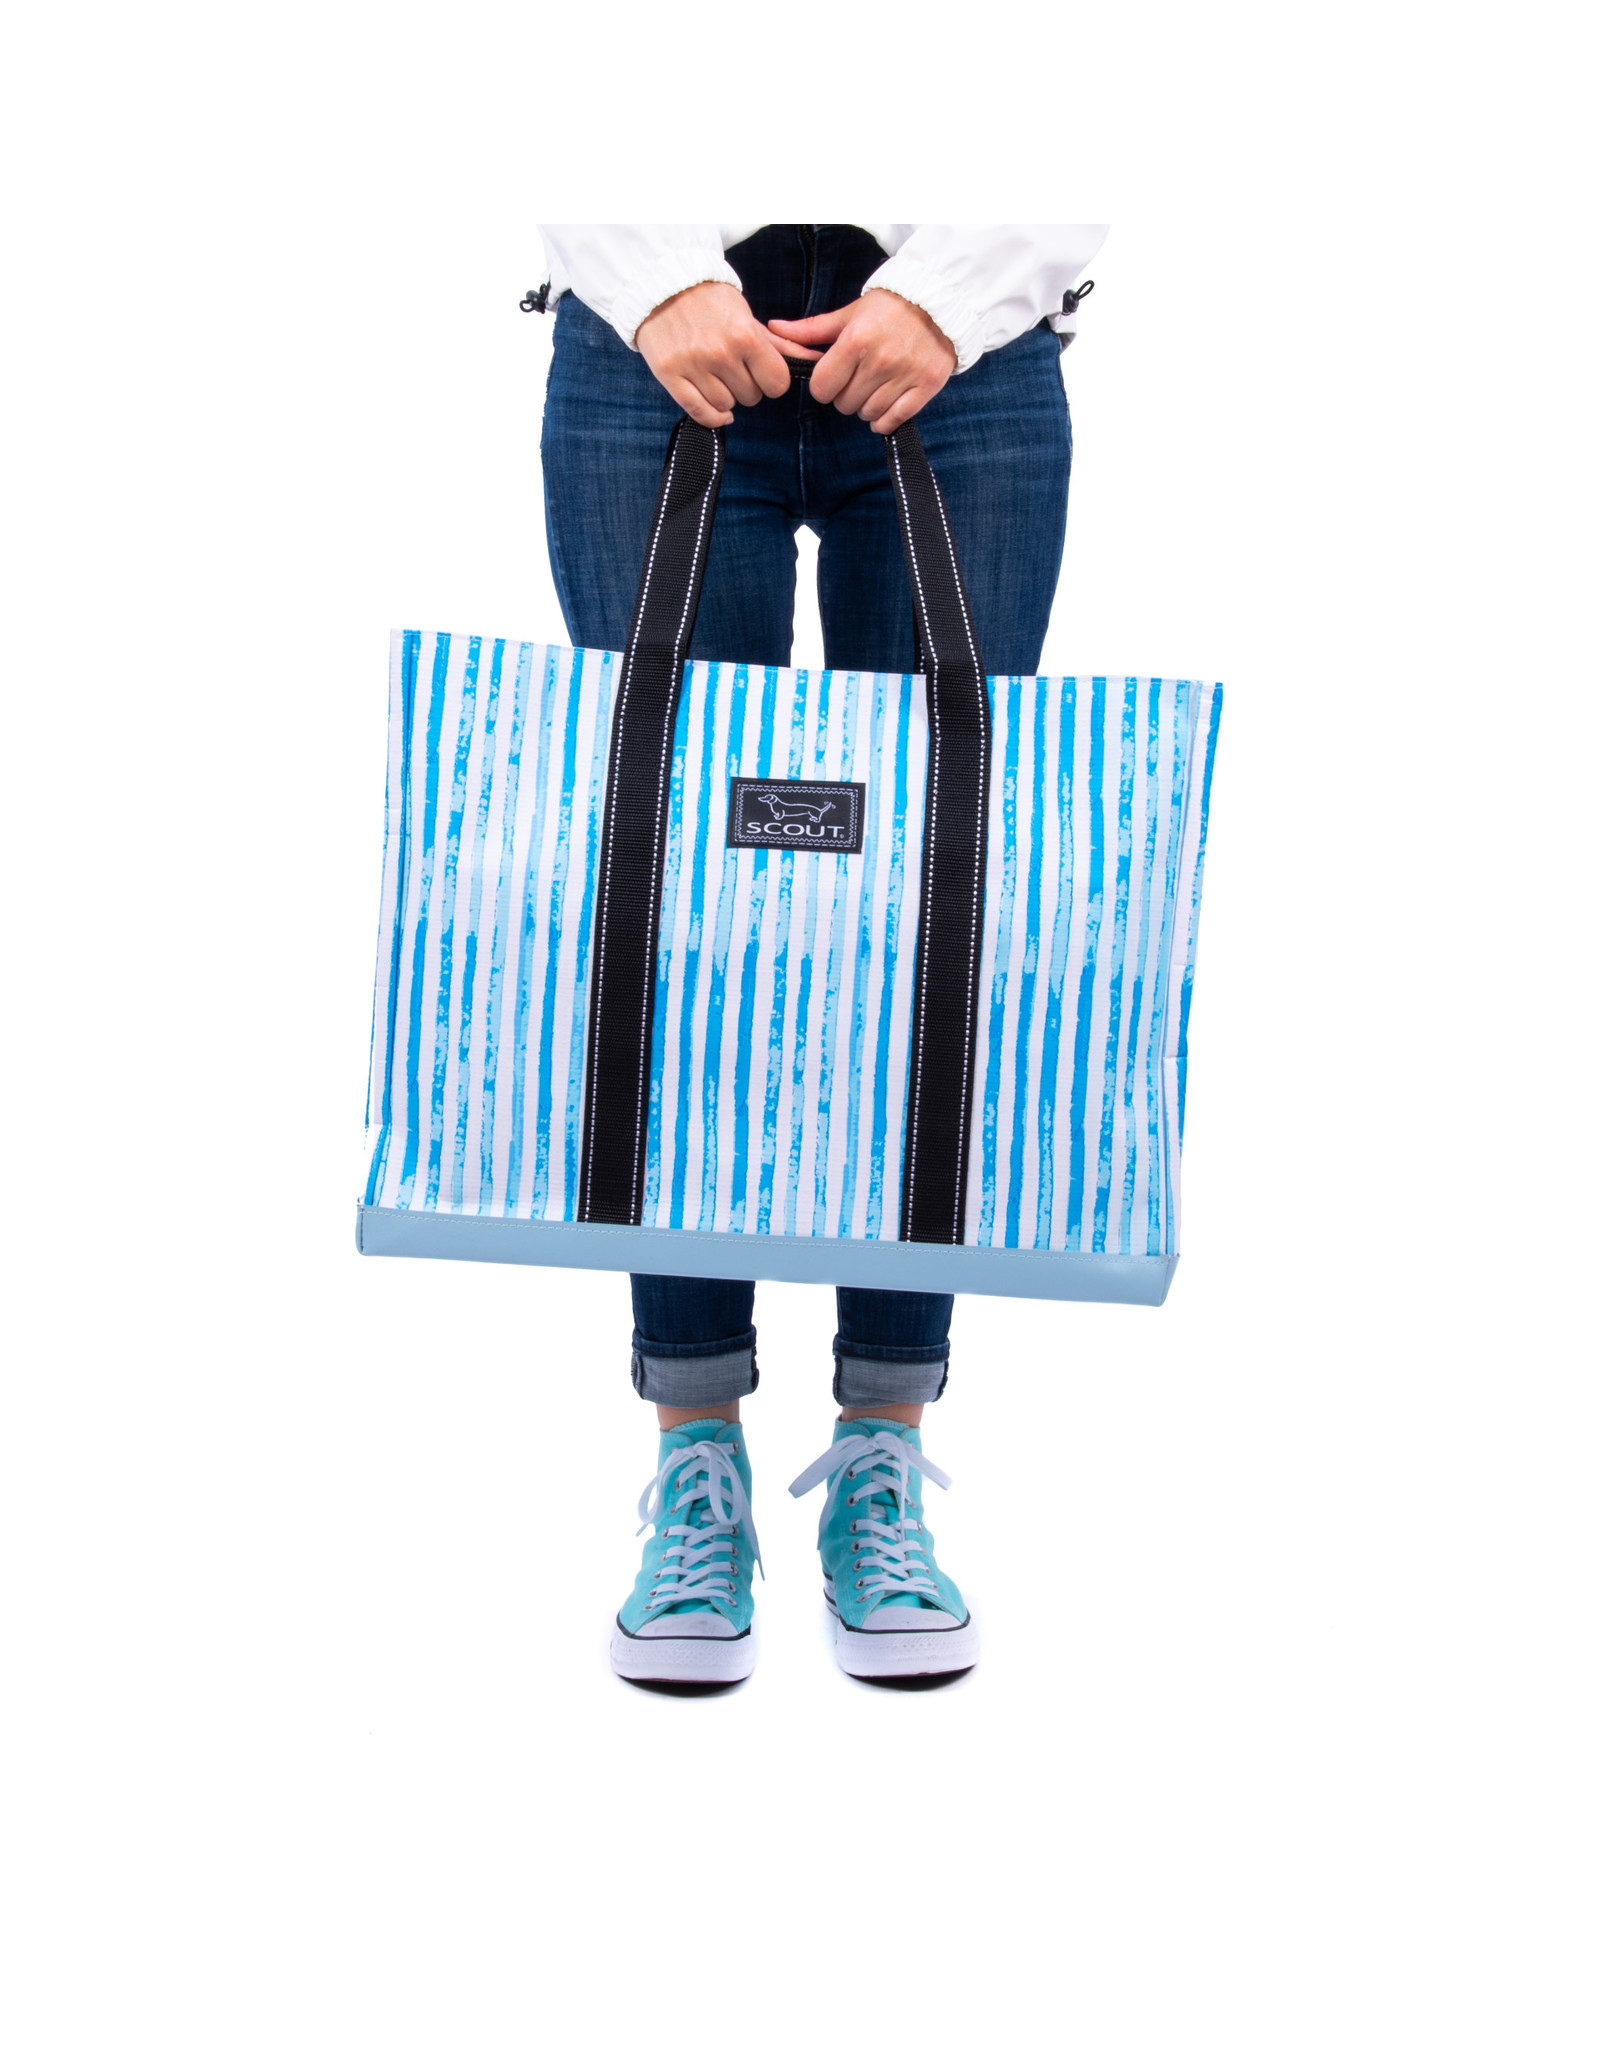 Scout Bags Original Deano Tote Bag Stream And Shout